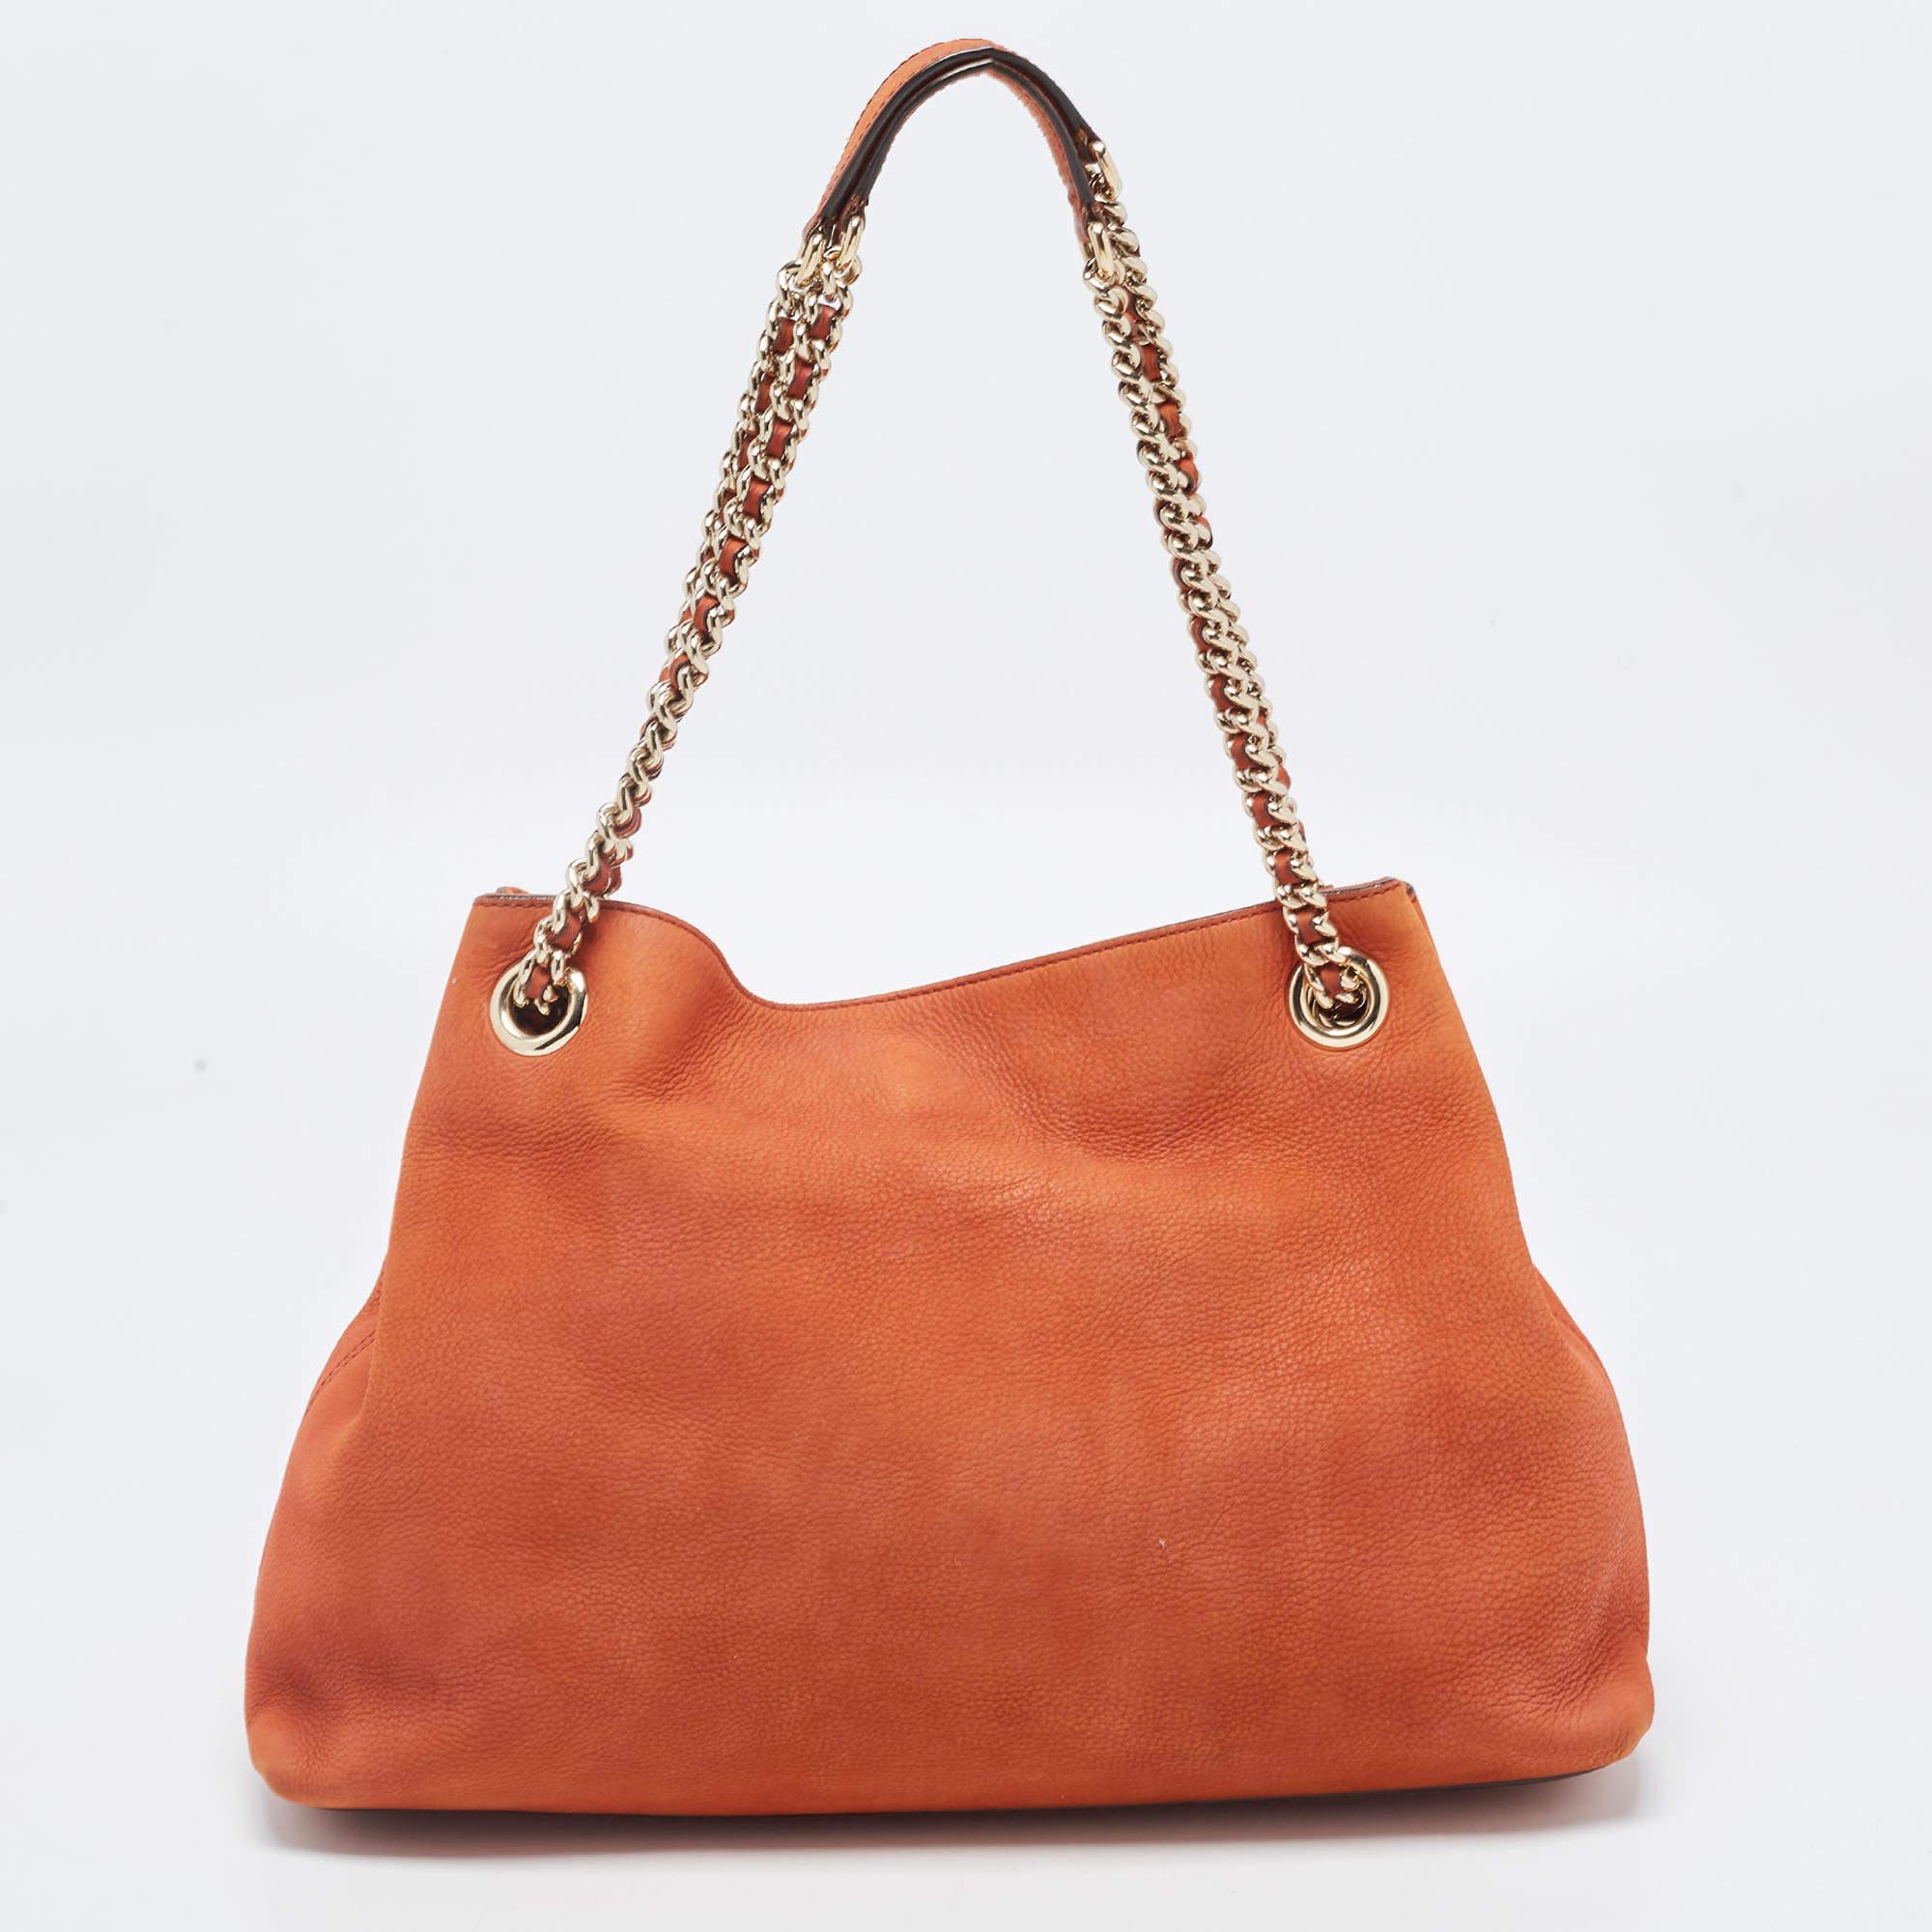 For a look that is complete with style, taste, and a touch of luxe, this designer bag is the perfect addition. Flaunt this beauty on your shoulder and revel in the taste of luxury it leaves you with.

Includes: Original Dustbag

